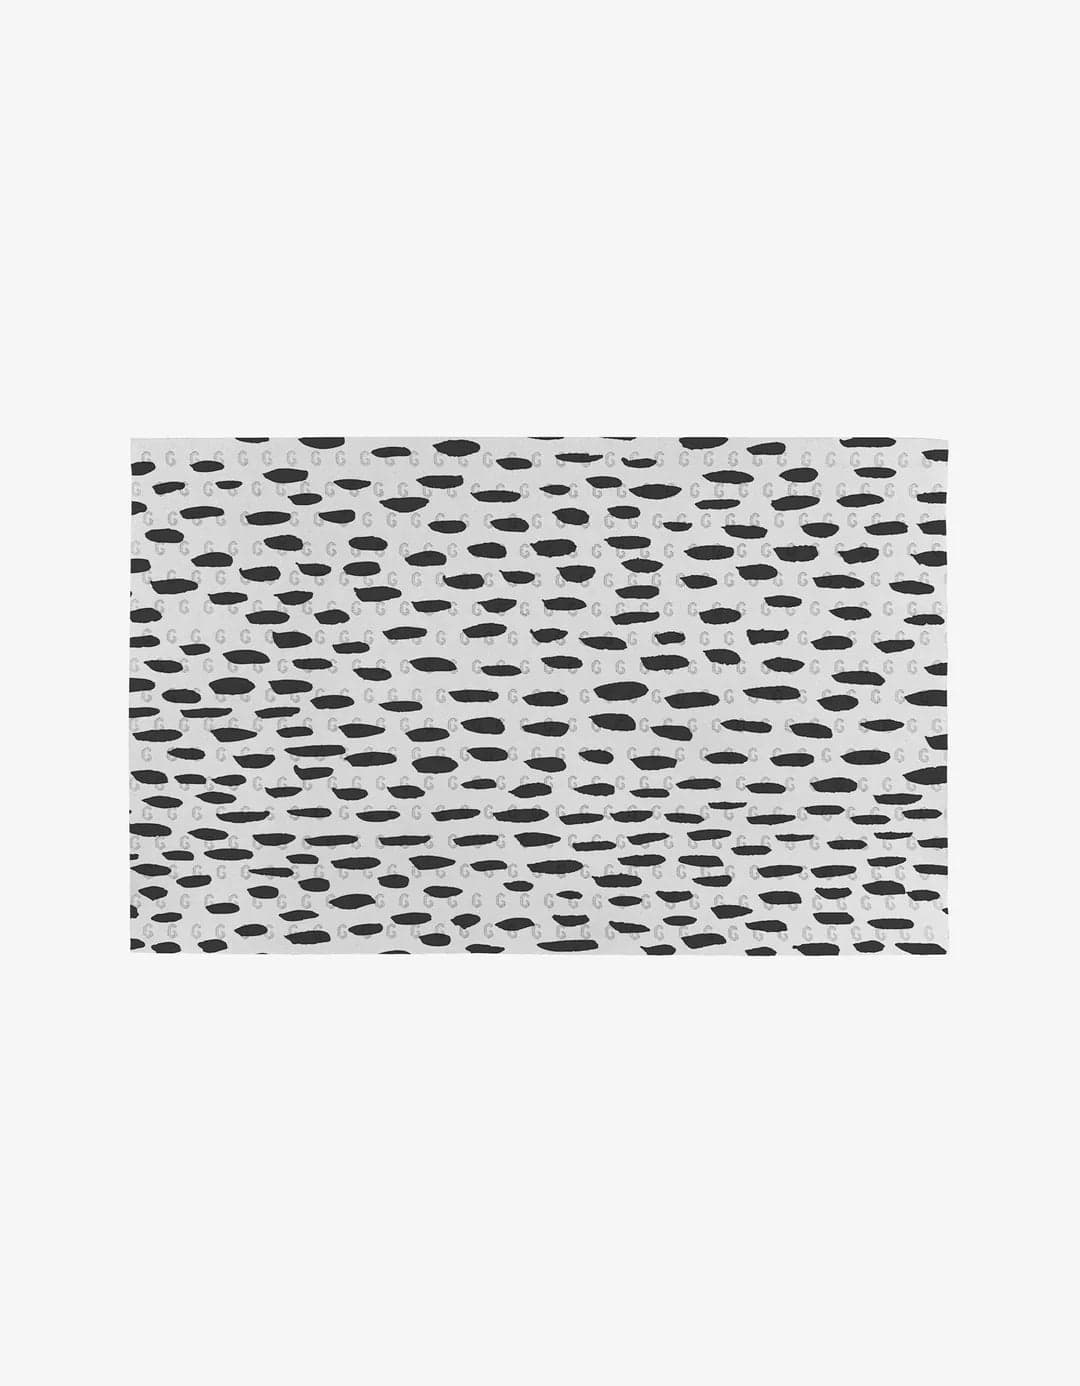 Geometry Kitchen Towels Not Paper Towels - Lines, Dots & Dashes